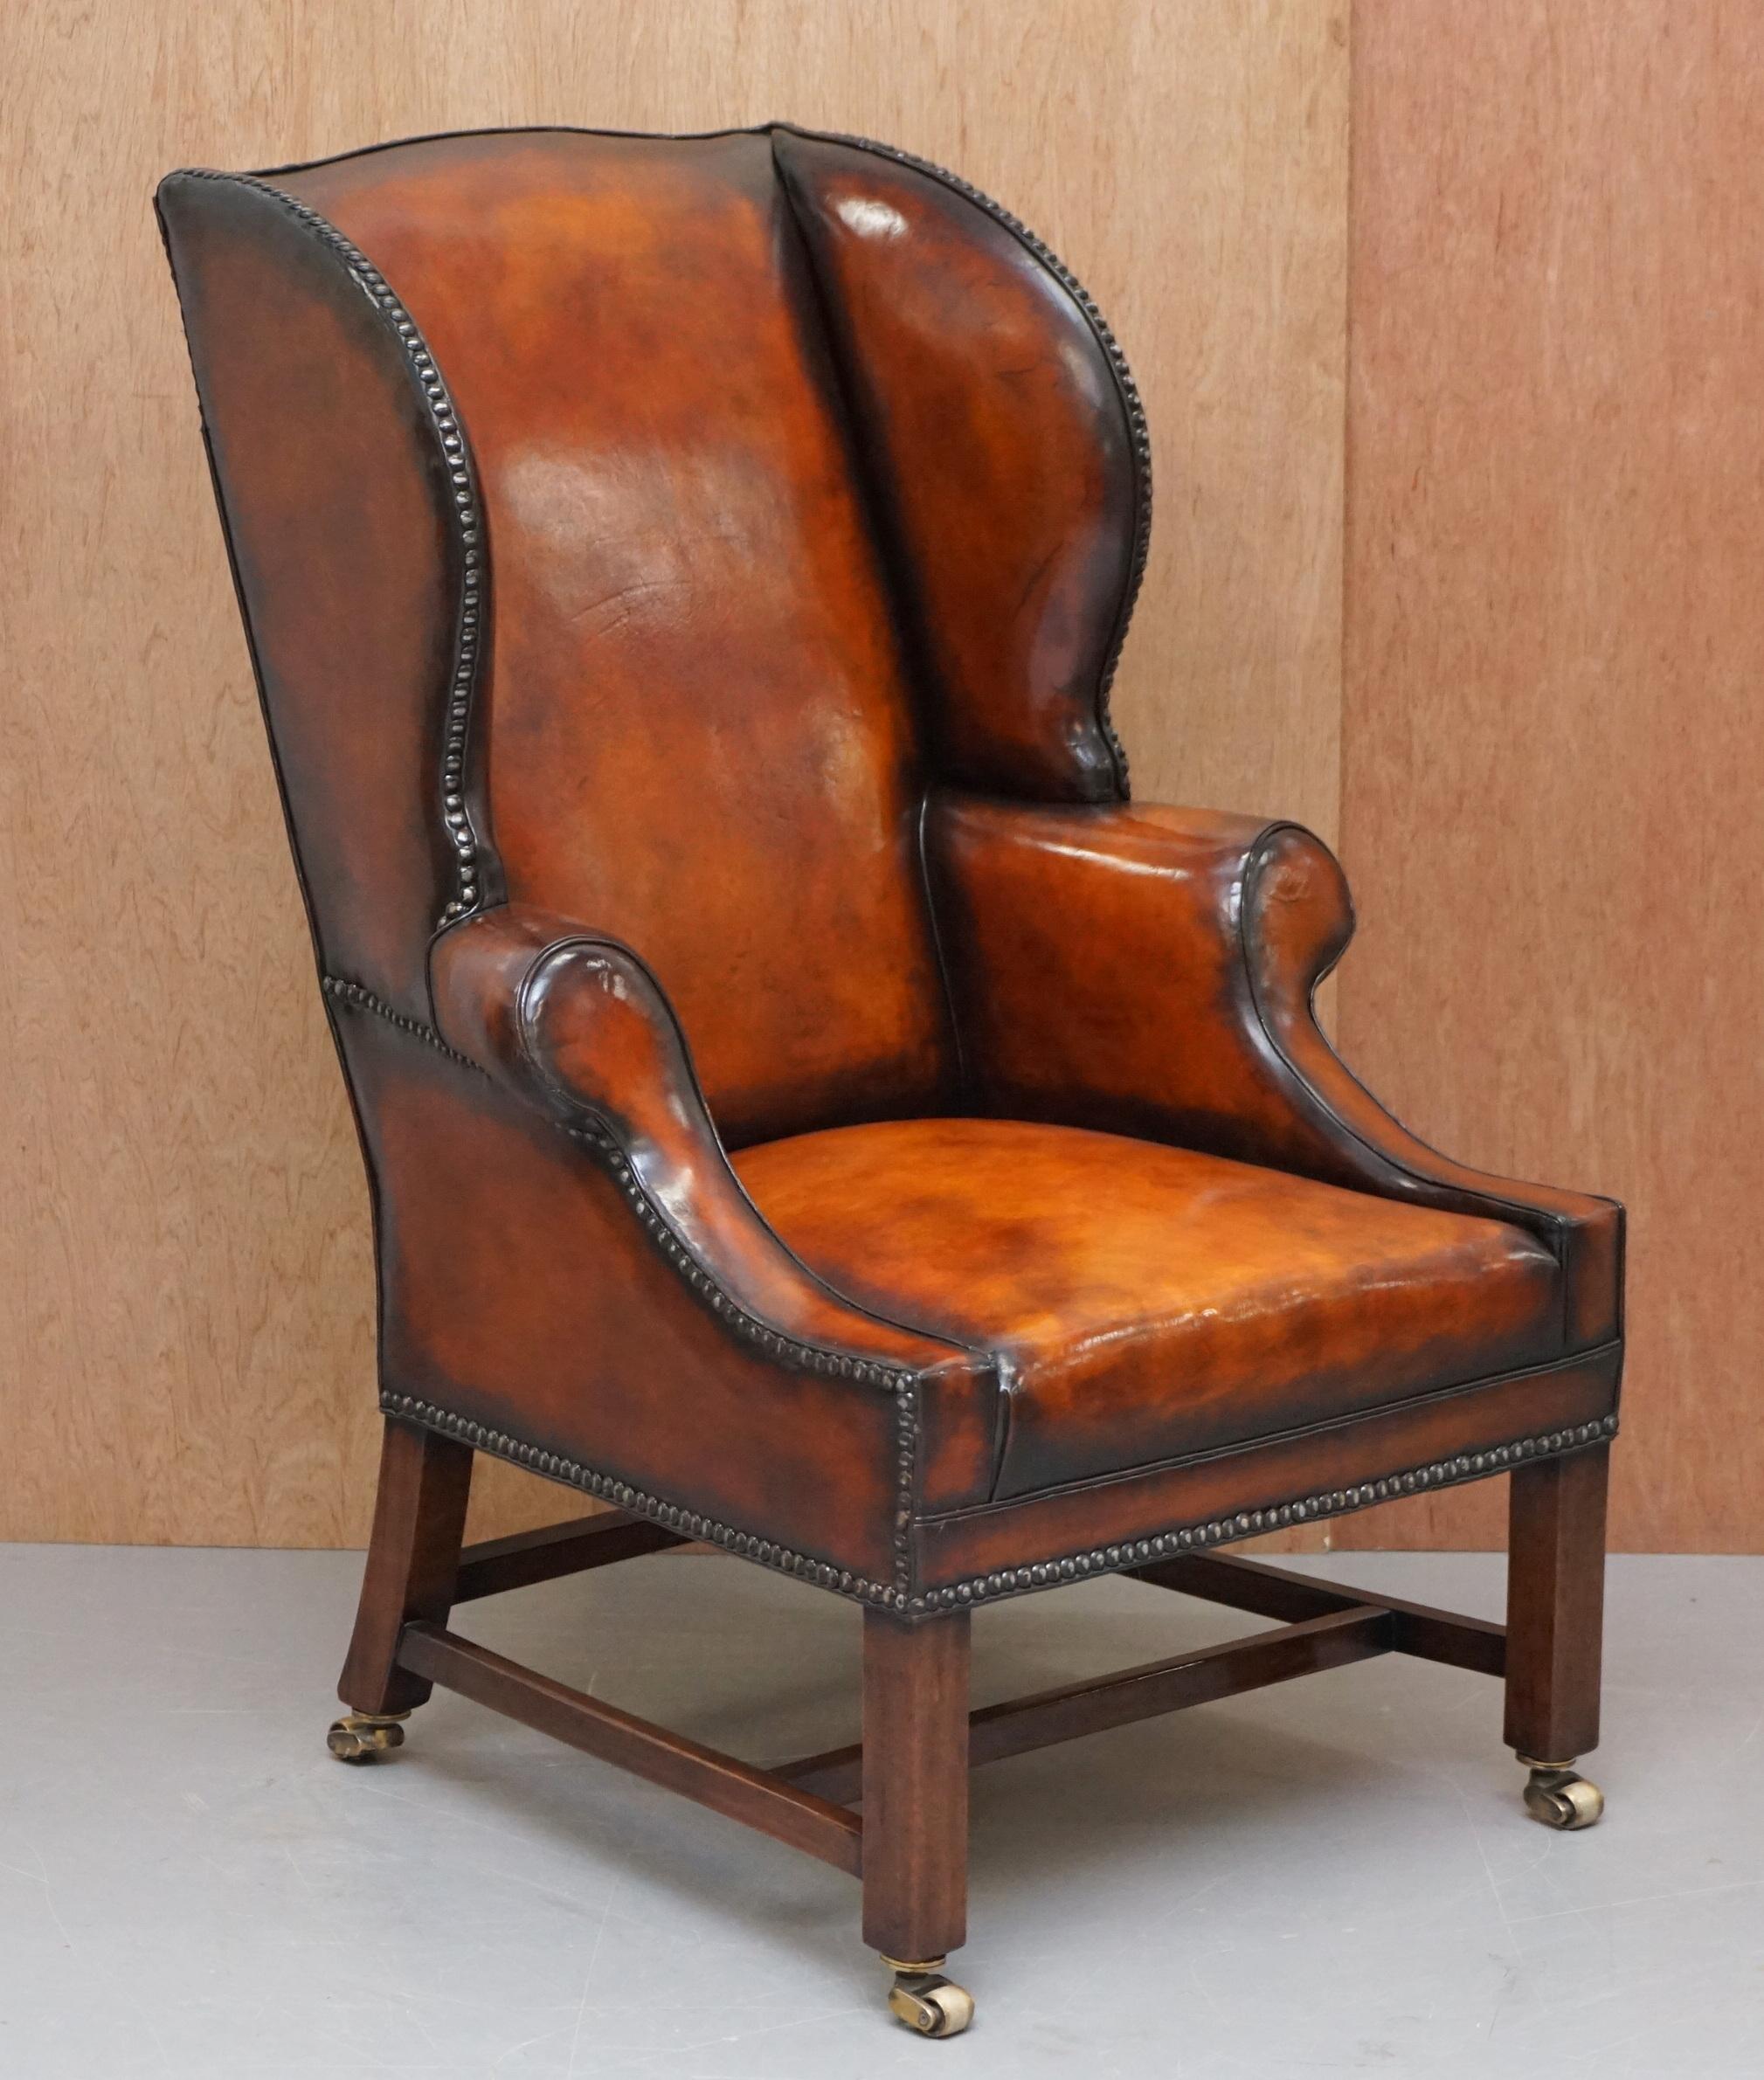 We are delighted to offer for sale this Sublime, very rare pair of lightly restored George III circa 1780 wingback armchairs

A simply glorious pair, the frames have the traditional George III elegant wings and short arms, it is the exact right